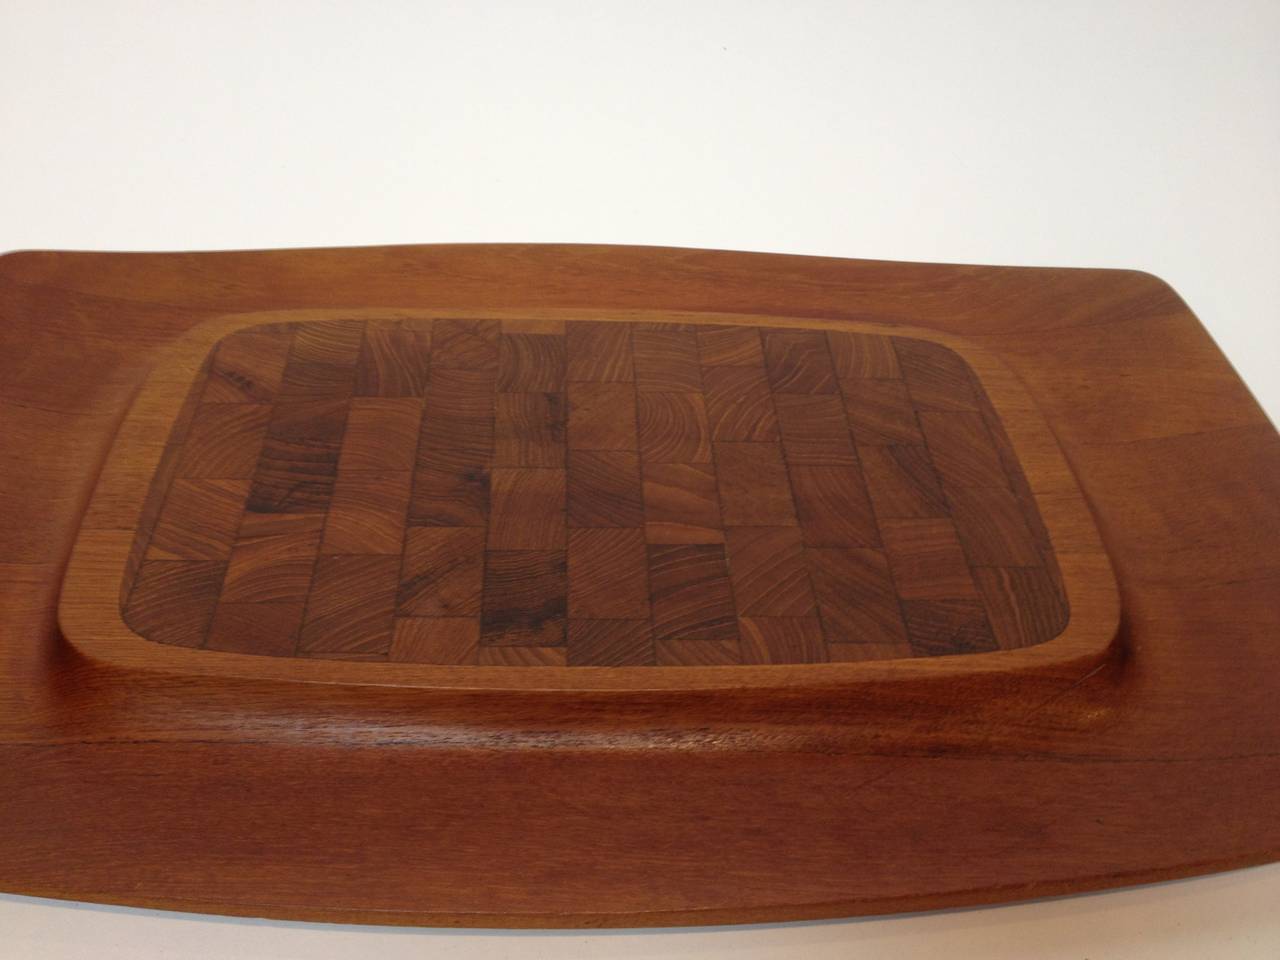 Mid-20th Century Dansk Teak Cutting Board or Serving Tray Designed by Jens H. Quistgaard